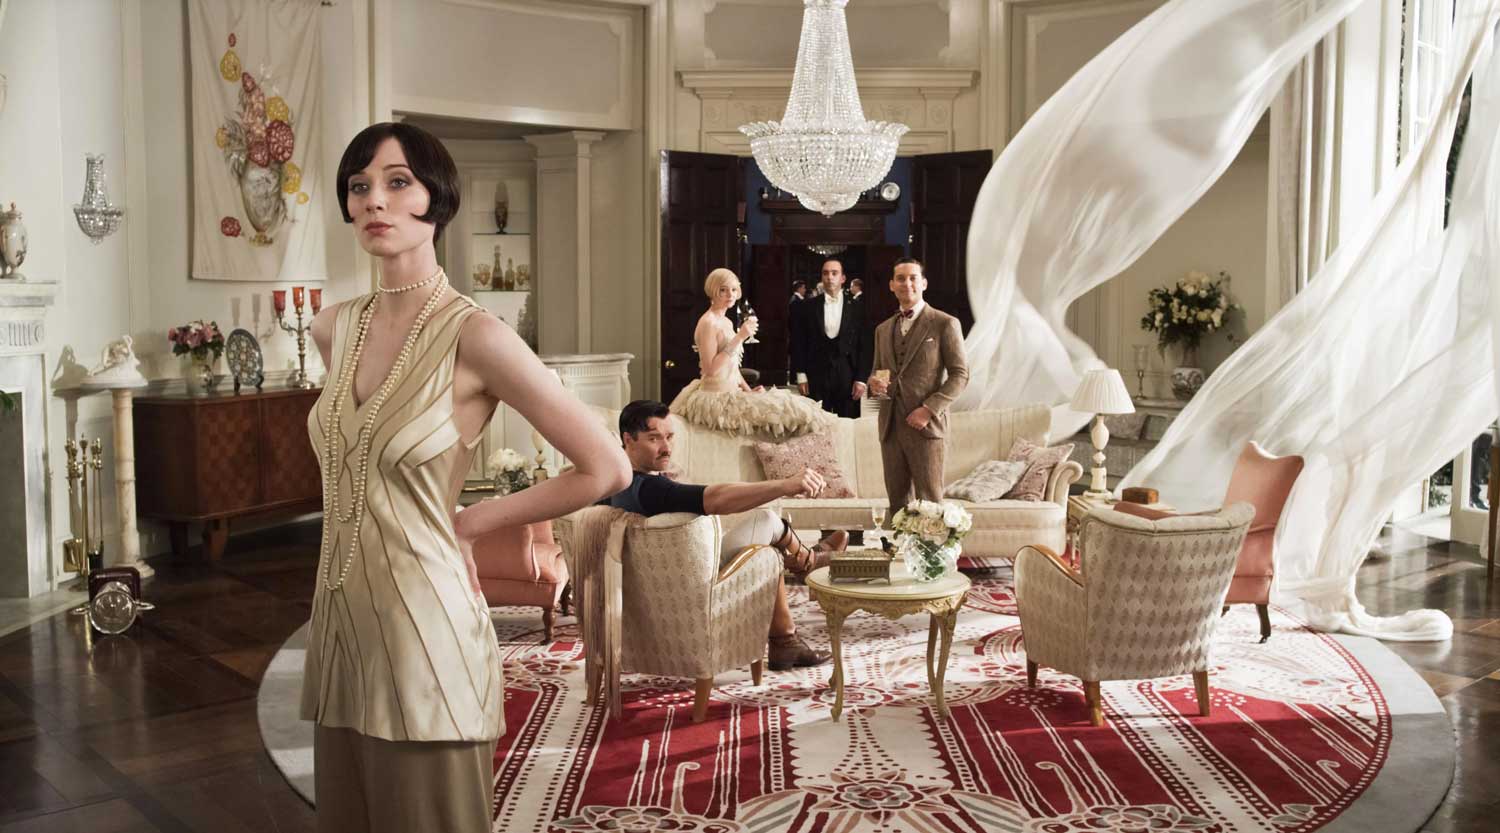 The Great Gatsby cast on set in Daisy's sitting room beautifully styled with 1920's mid century furniture a crystal chandelier and red art deco rug